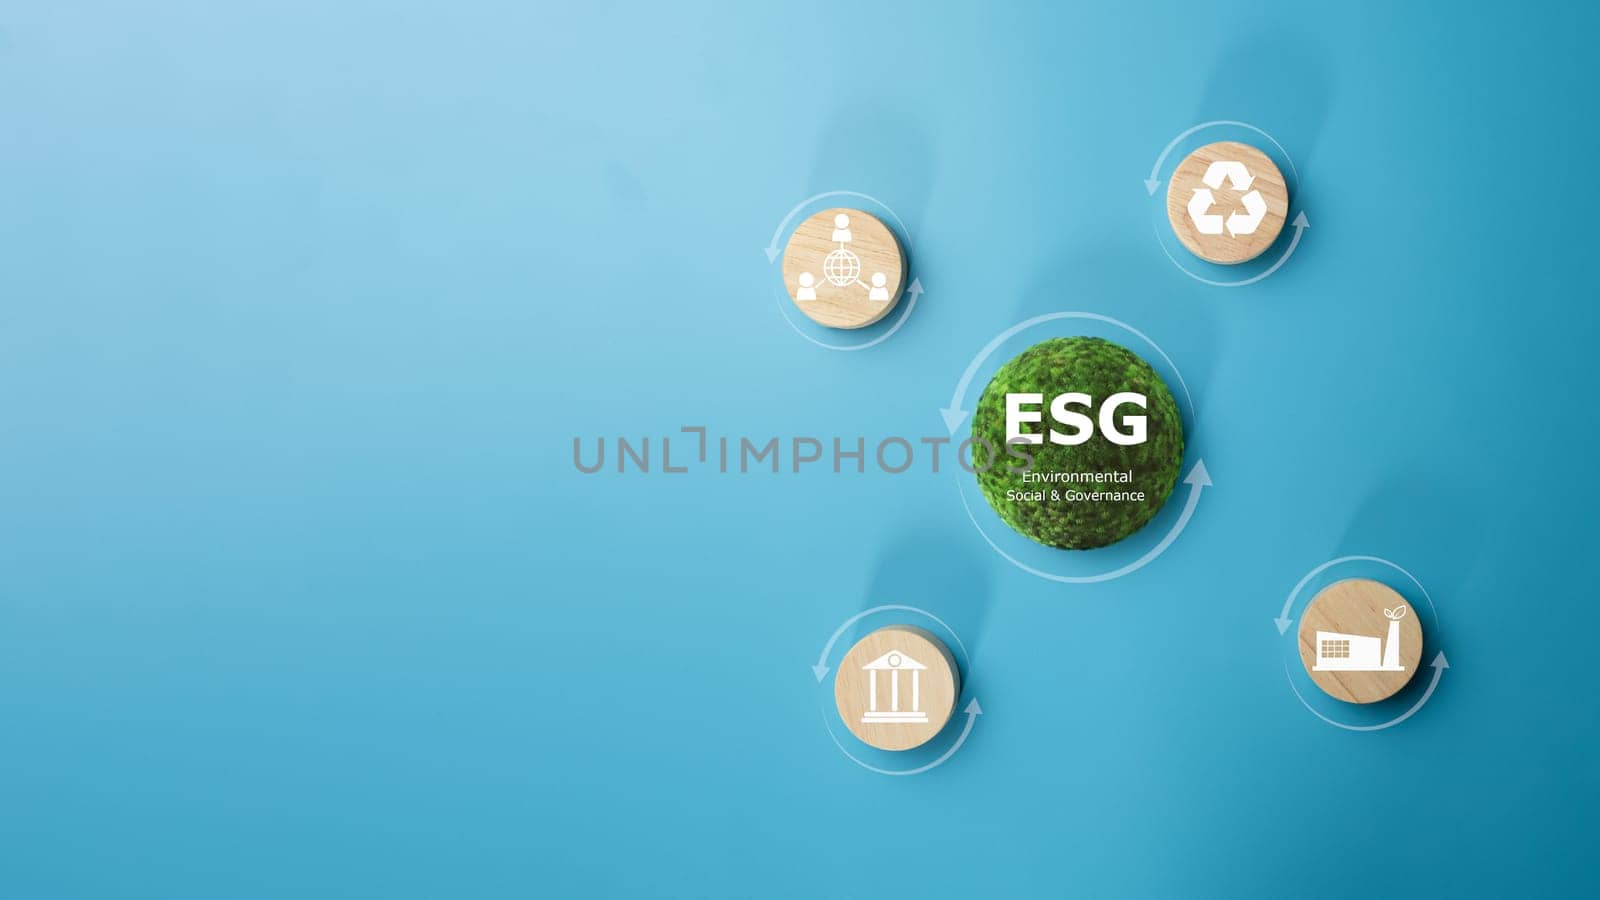 ESG concepts for sustainable environment, society and governance Businesses are environmentally responsible, A circular wooden board with the abbreviation ESG printed on a light blue background.